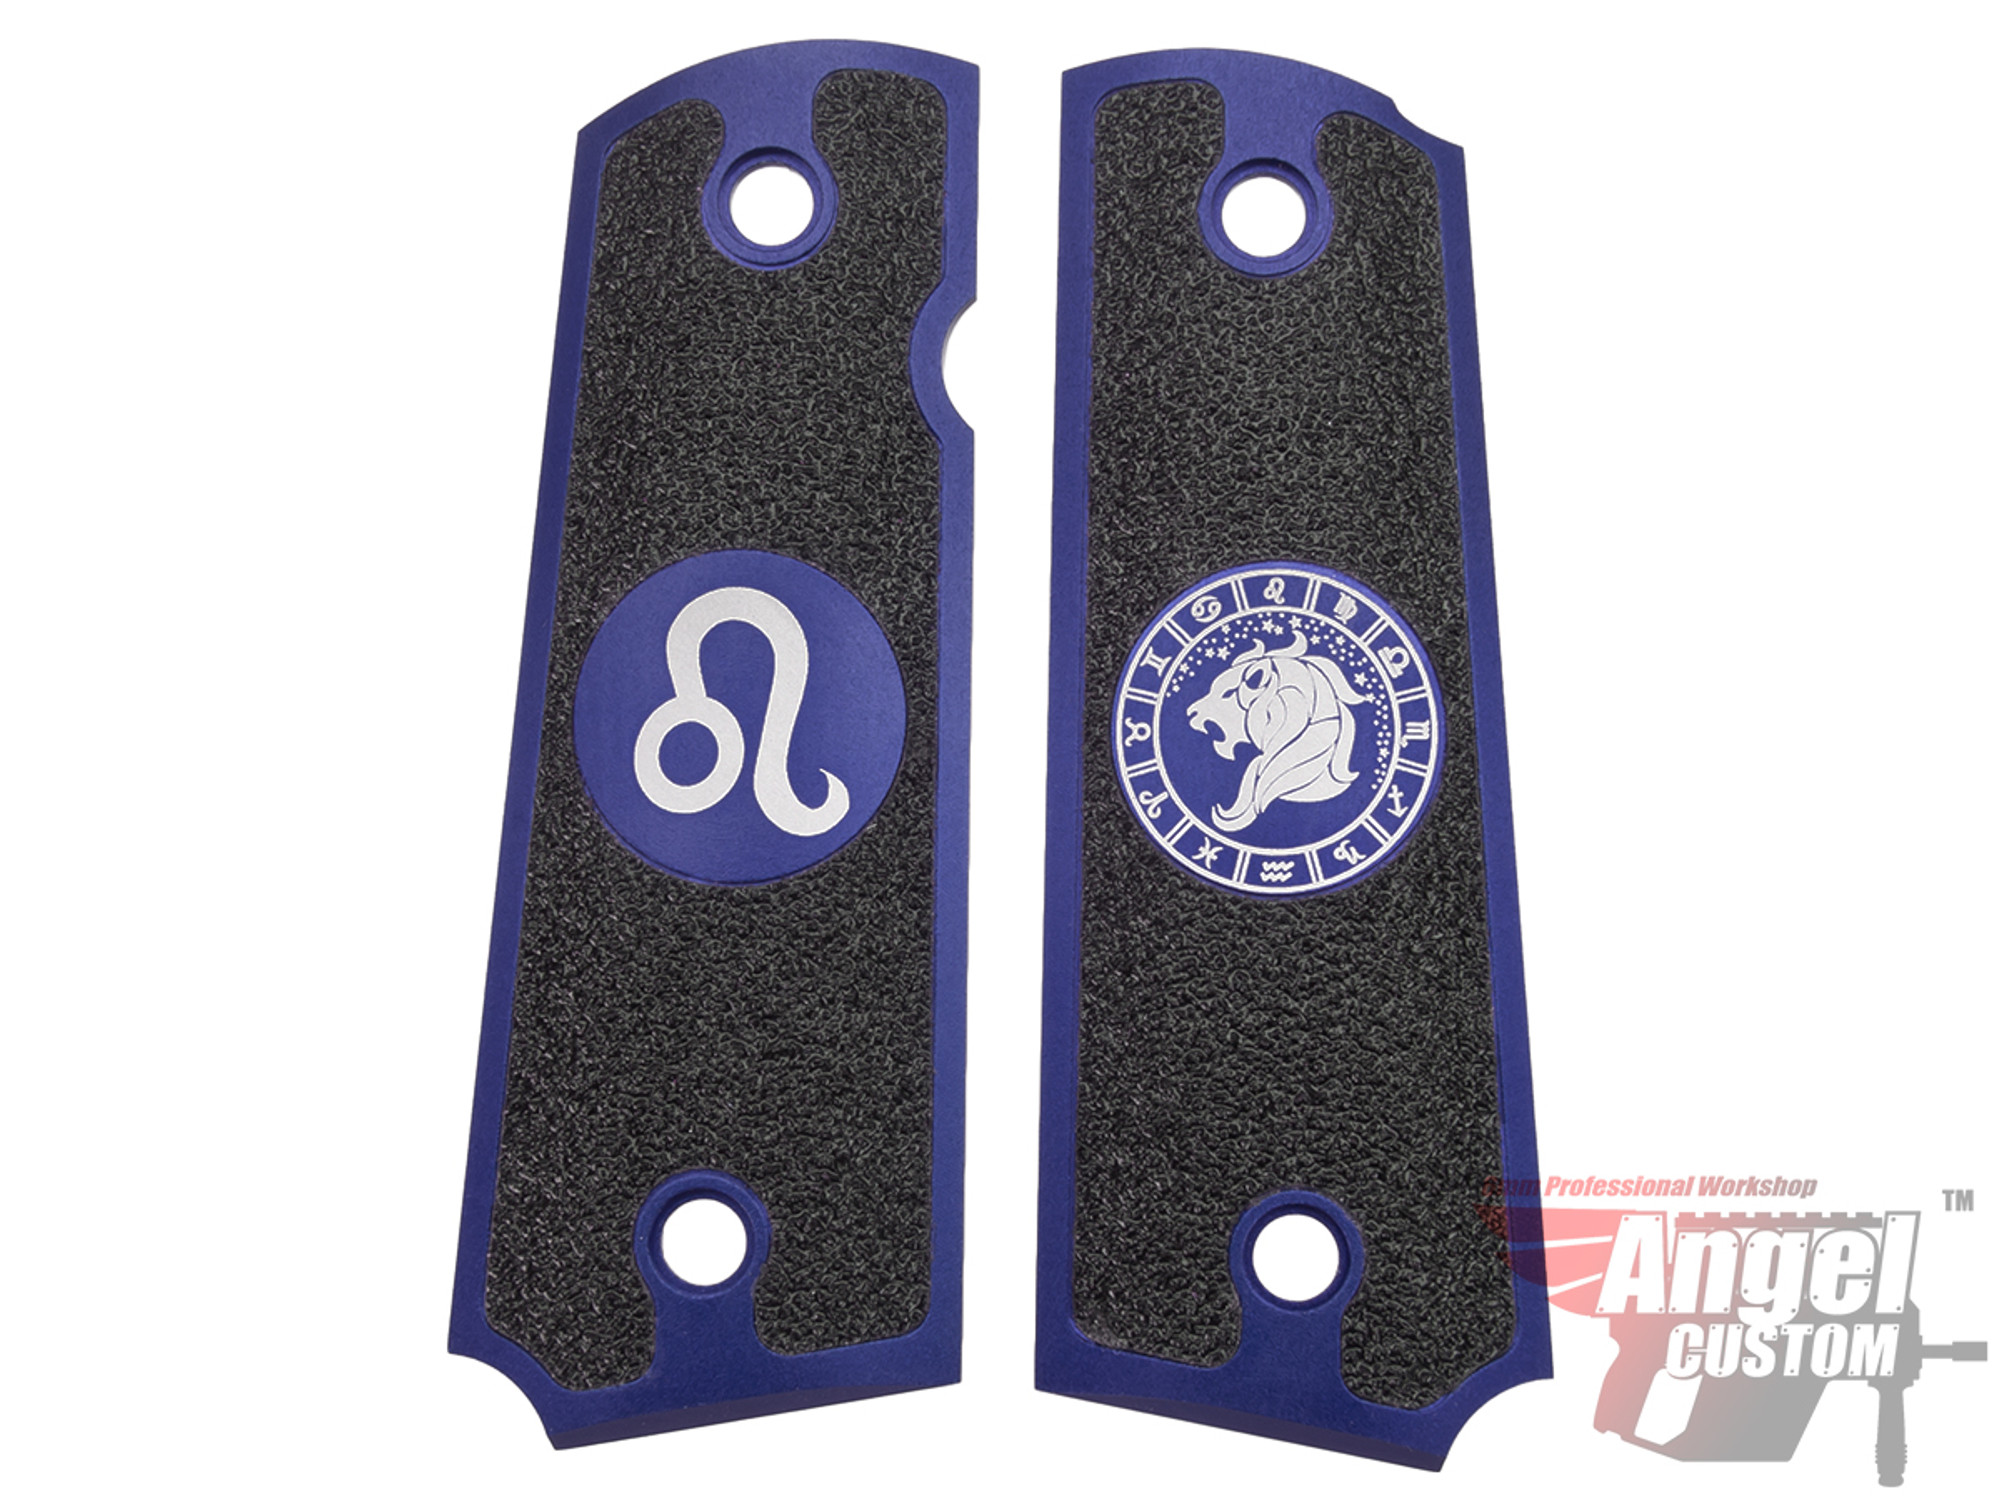 Angel Custom CNC Machined Tac-Glove "Zodiac" Grips for Tokyo Marui/KWA/Western Arms 1911 Series Airsoft Pistols - Navy Blue (Sign: Leo)